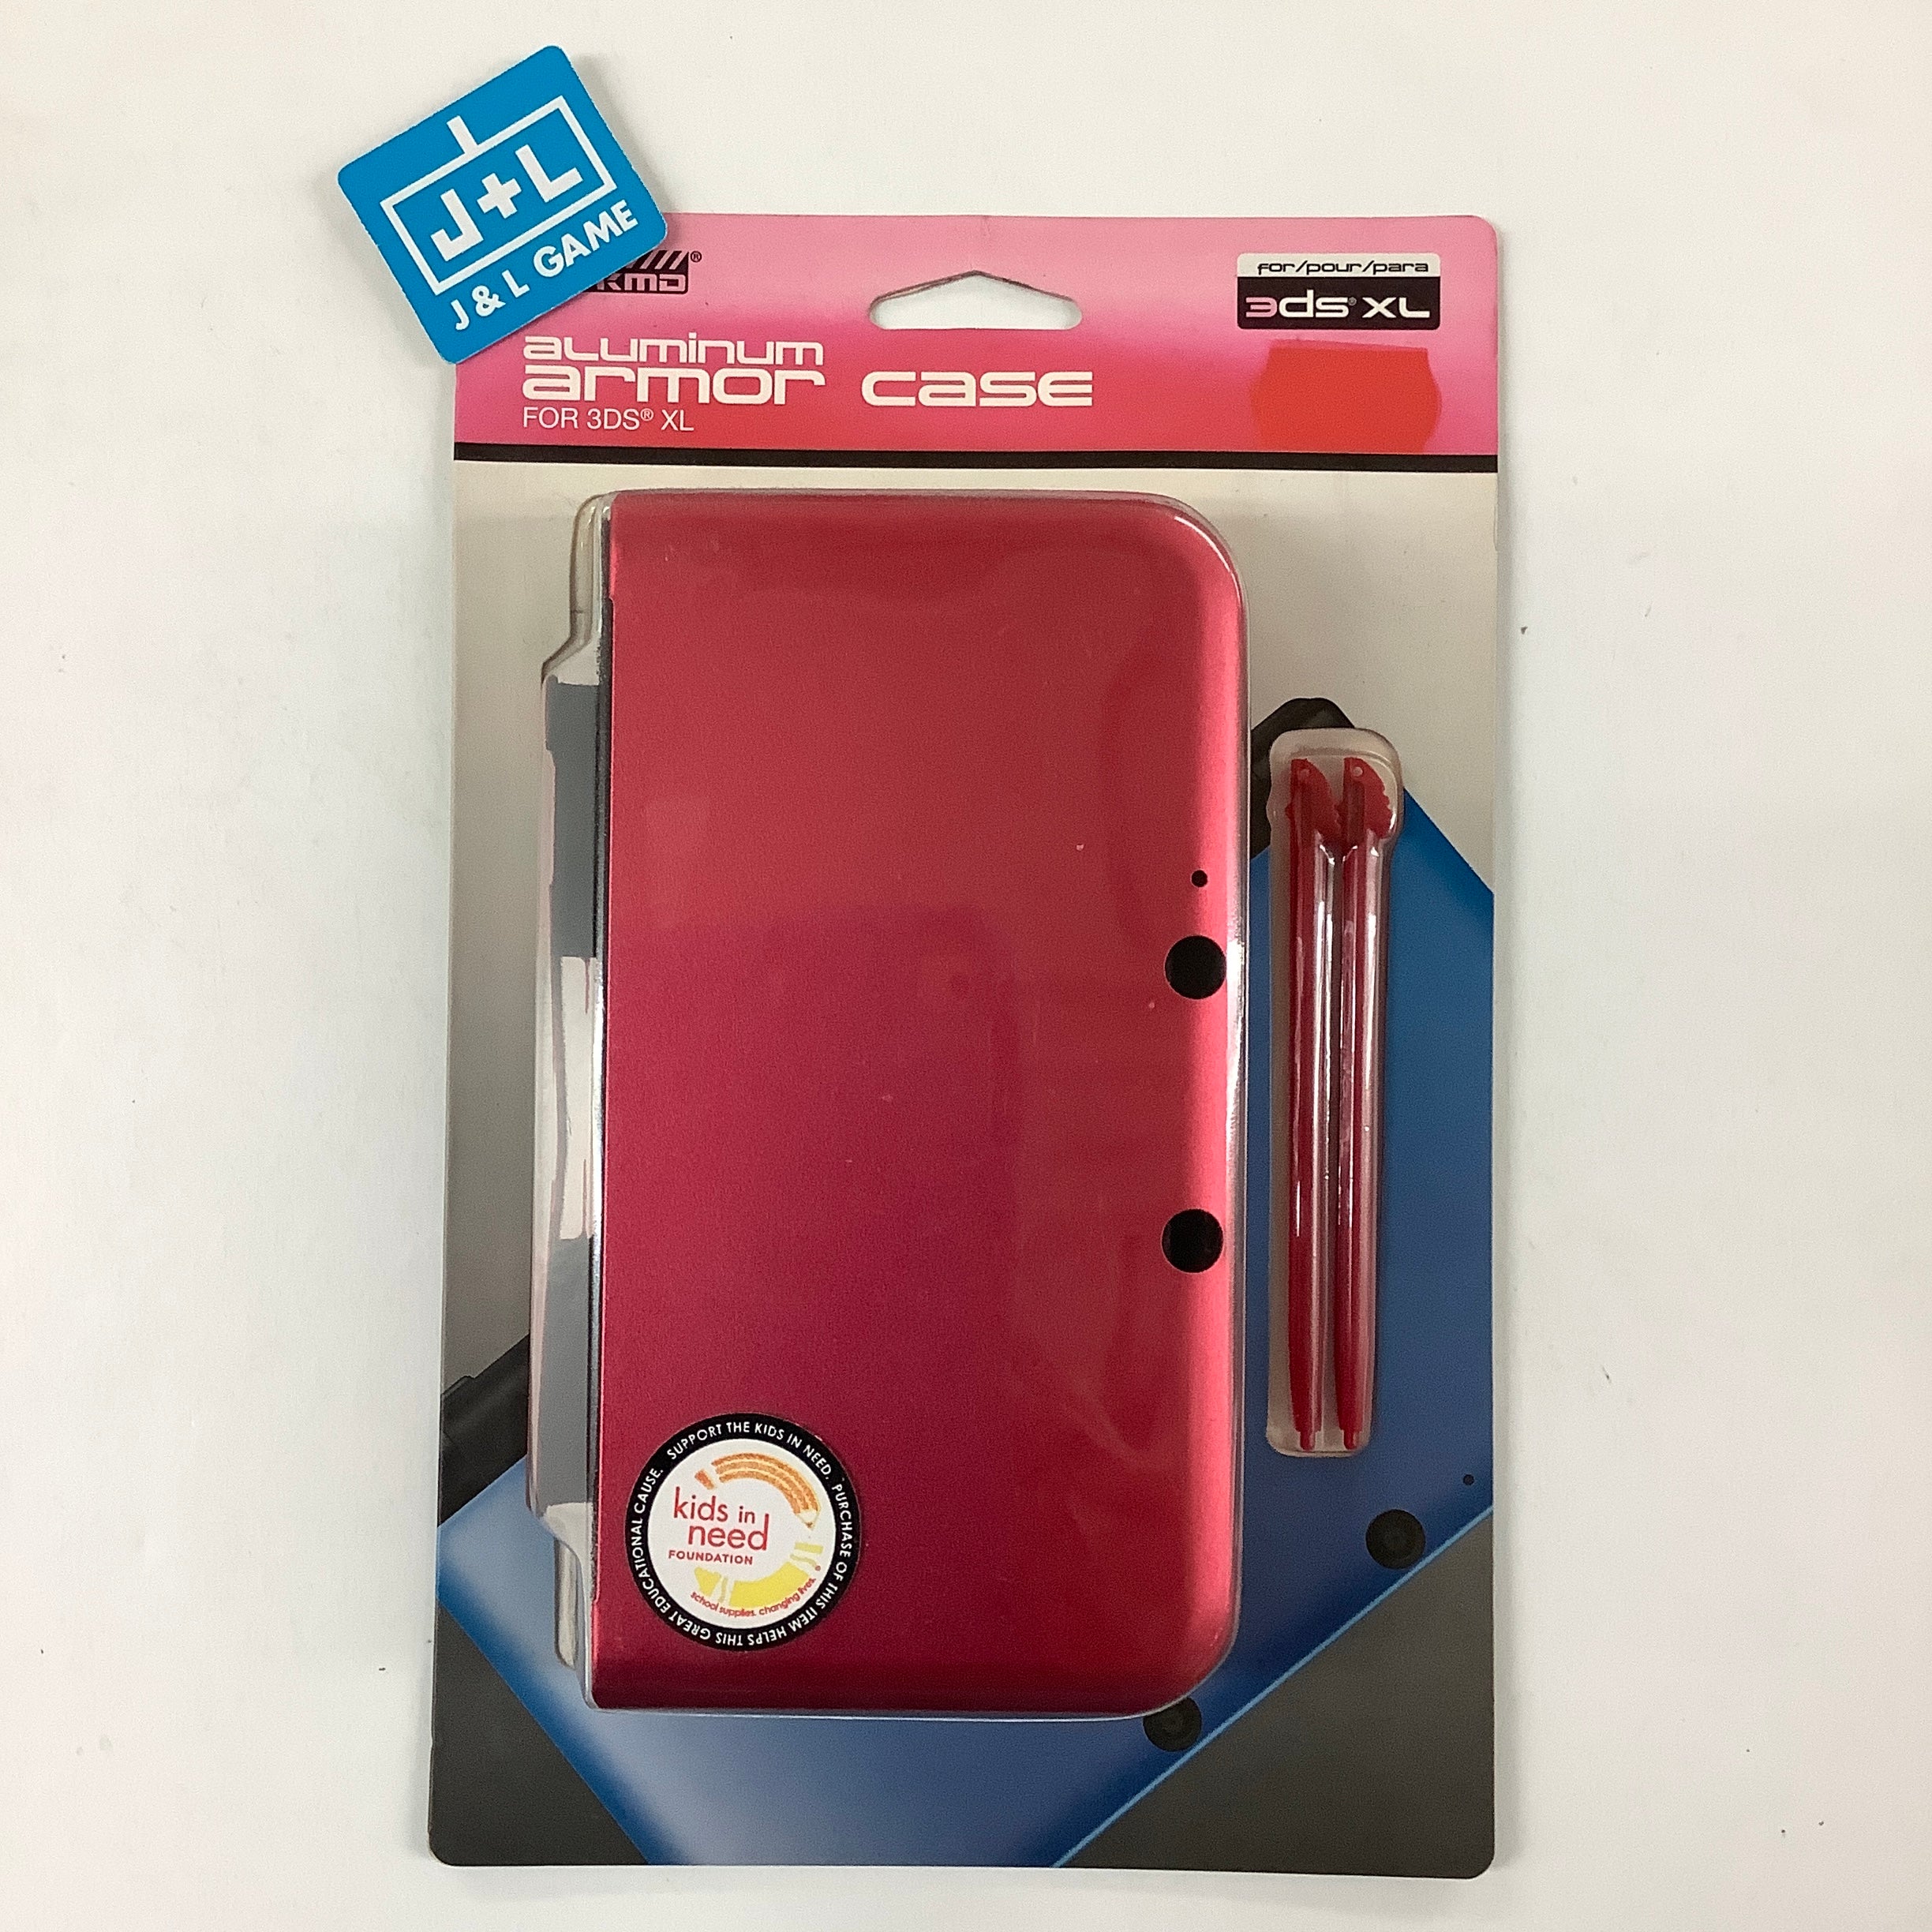 KMD Aluminum Armor Case for 3DS XL (Red) - Nintendo 3DS ACCESSORIES KMD   